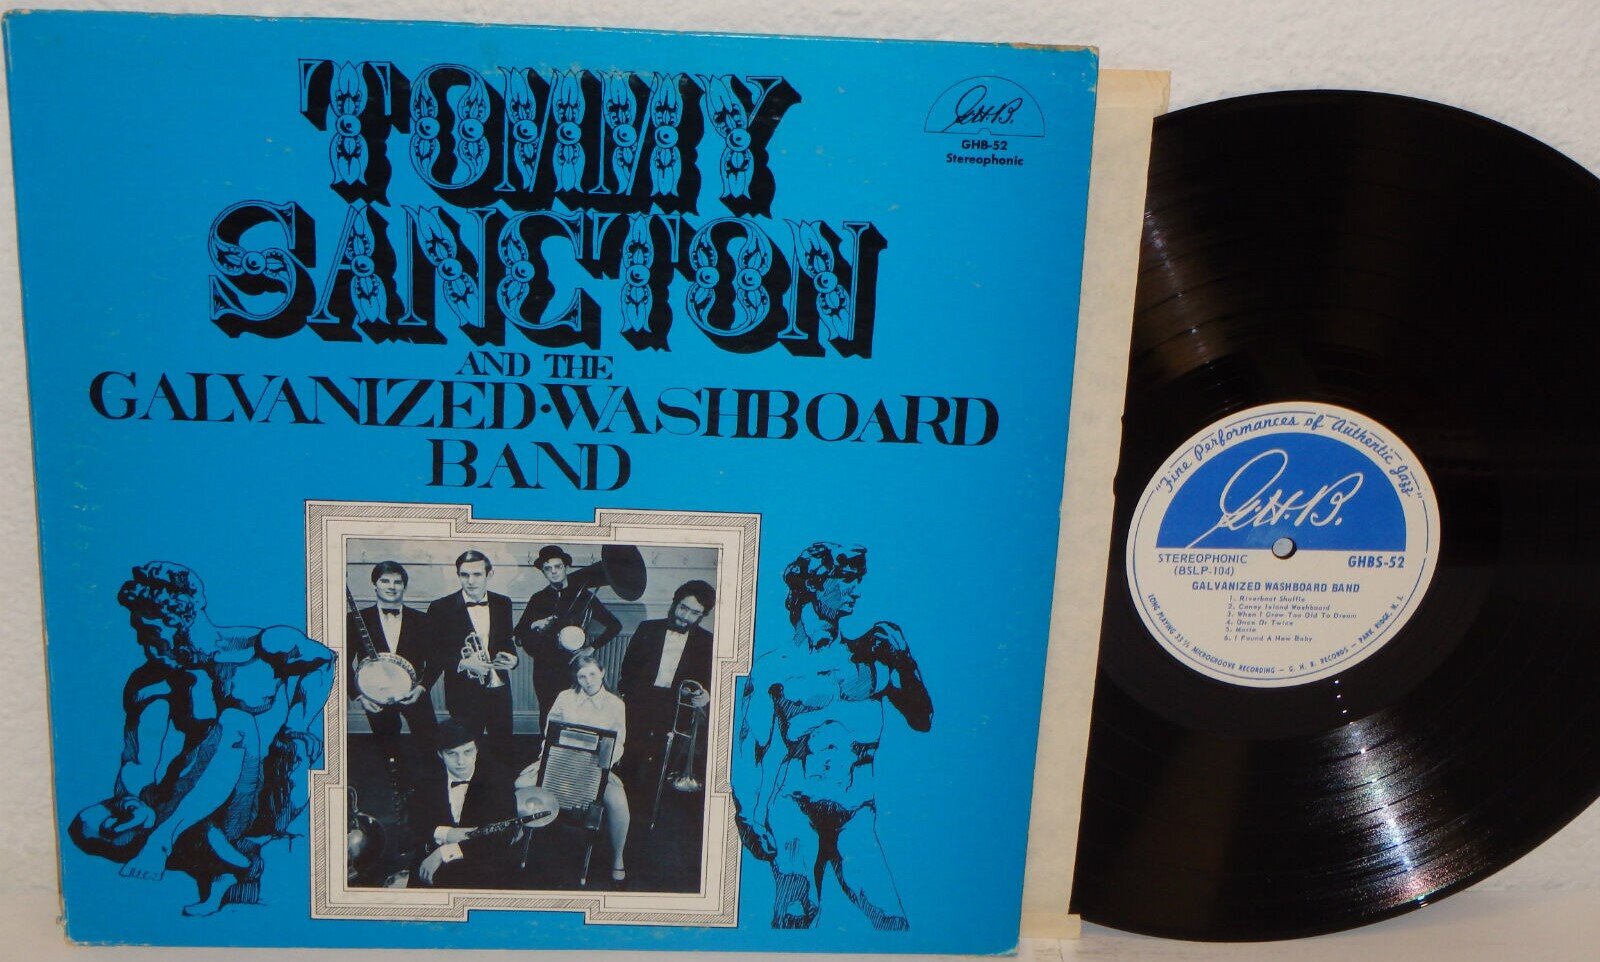 Early History of the Galvanized Jazz Band